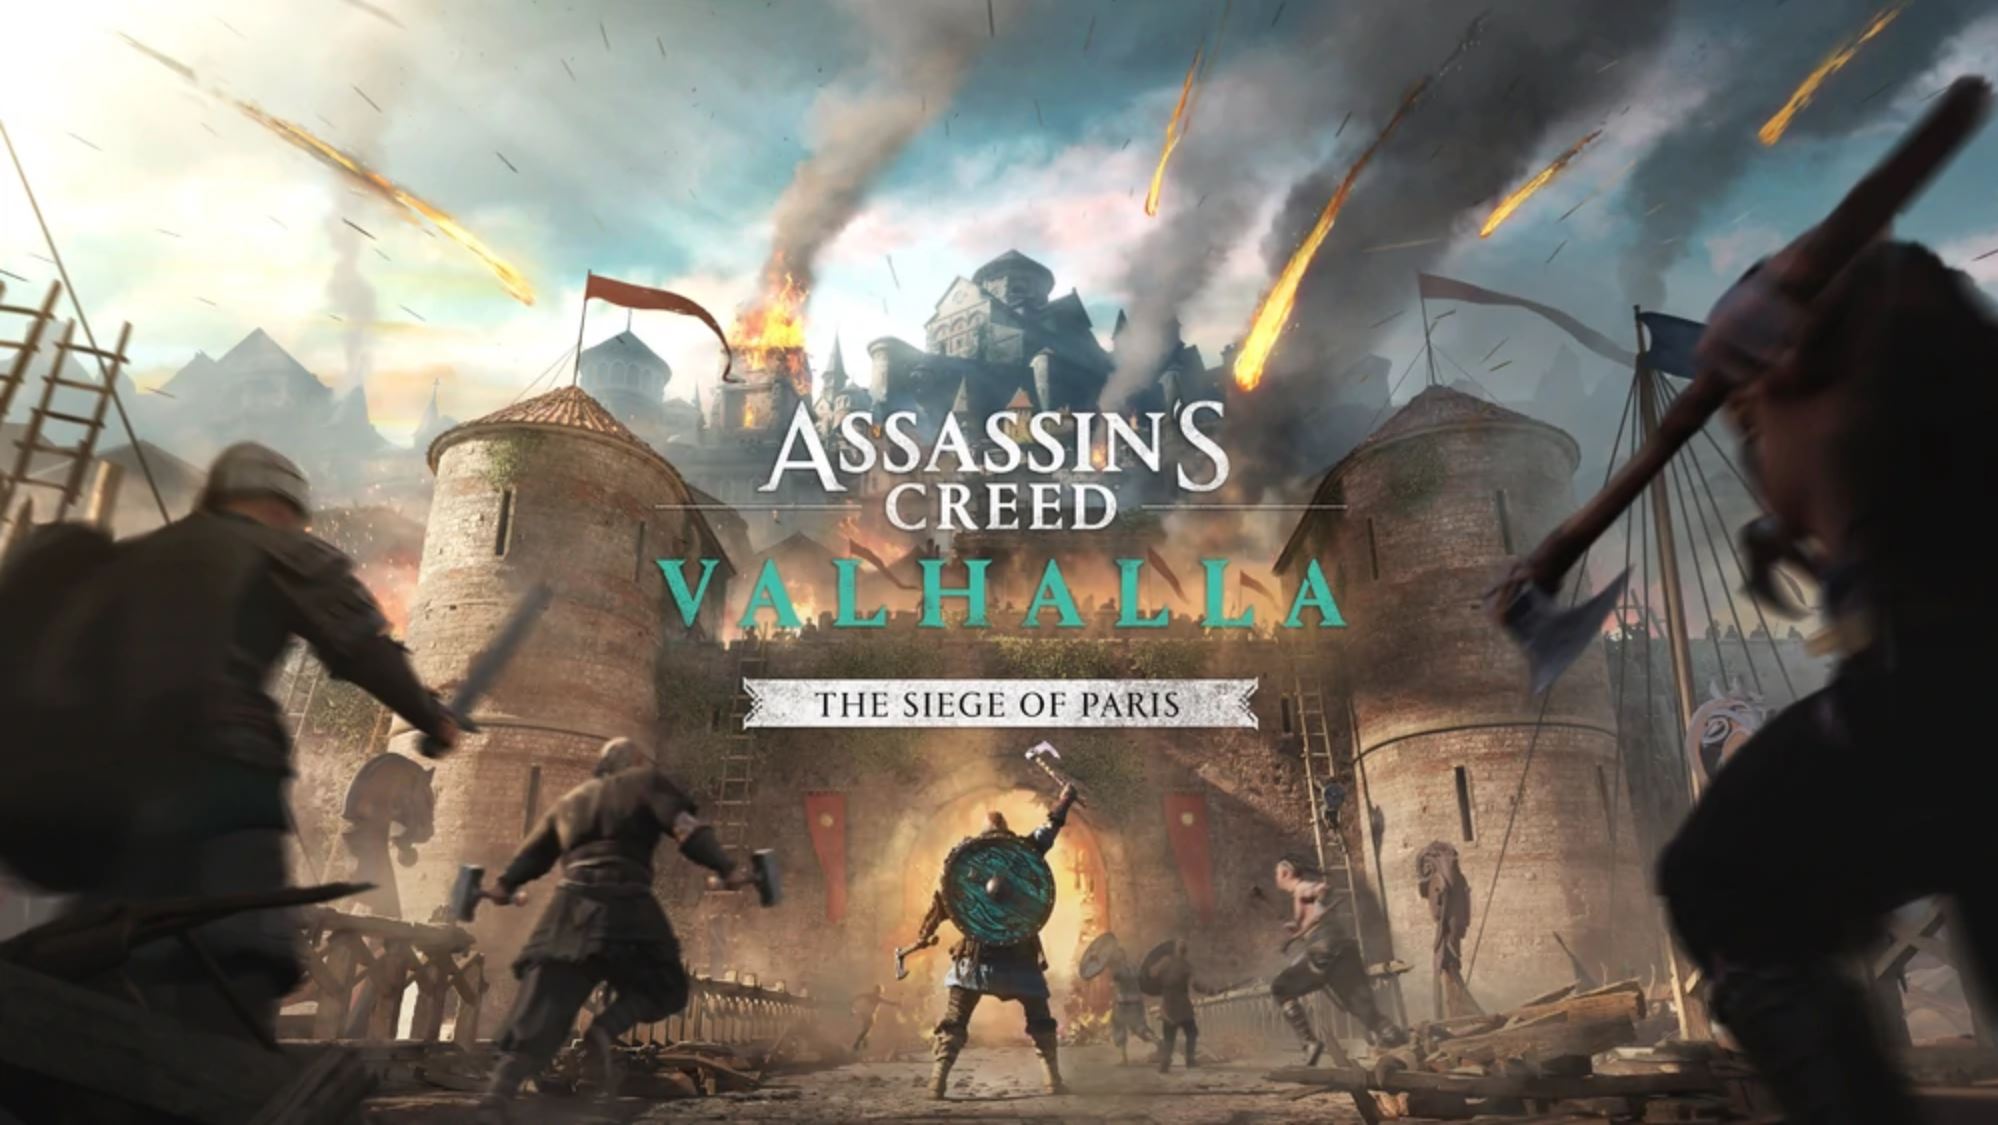 Assassin's Creed Valhalla Siege of Paris Release Date Revealed